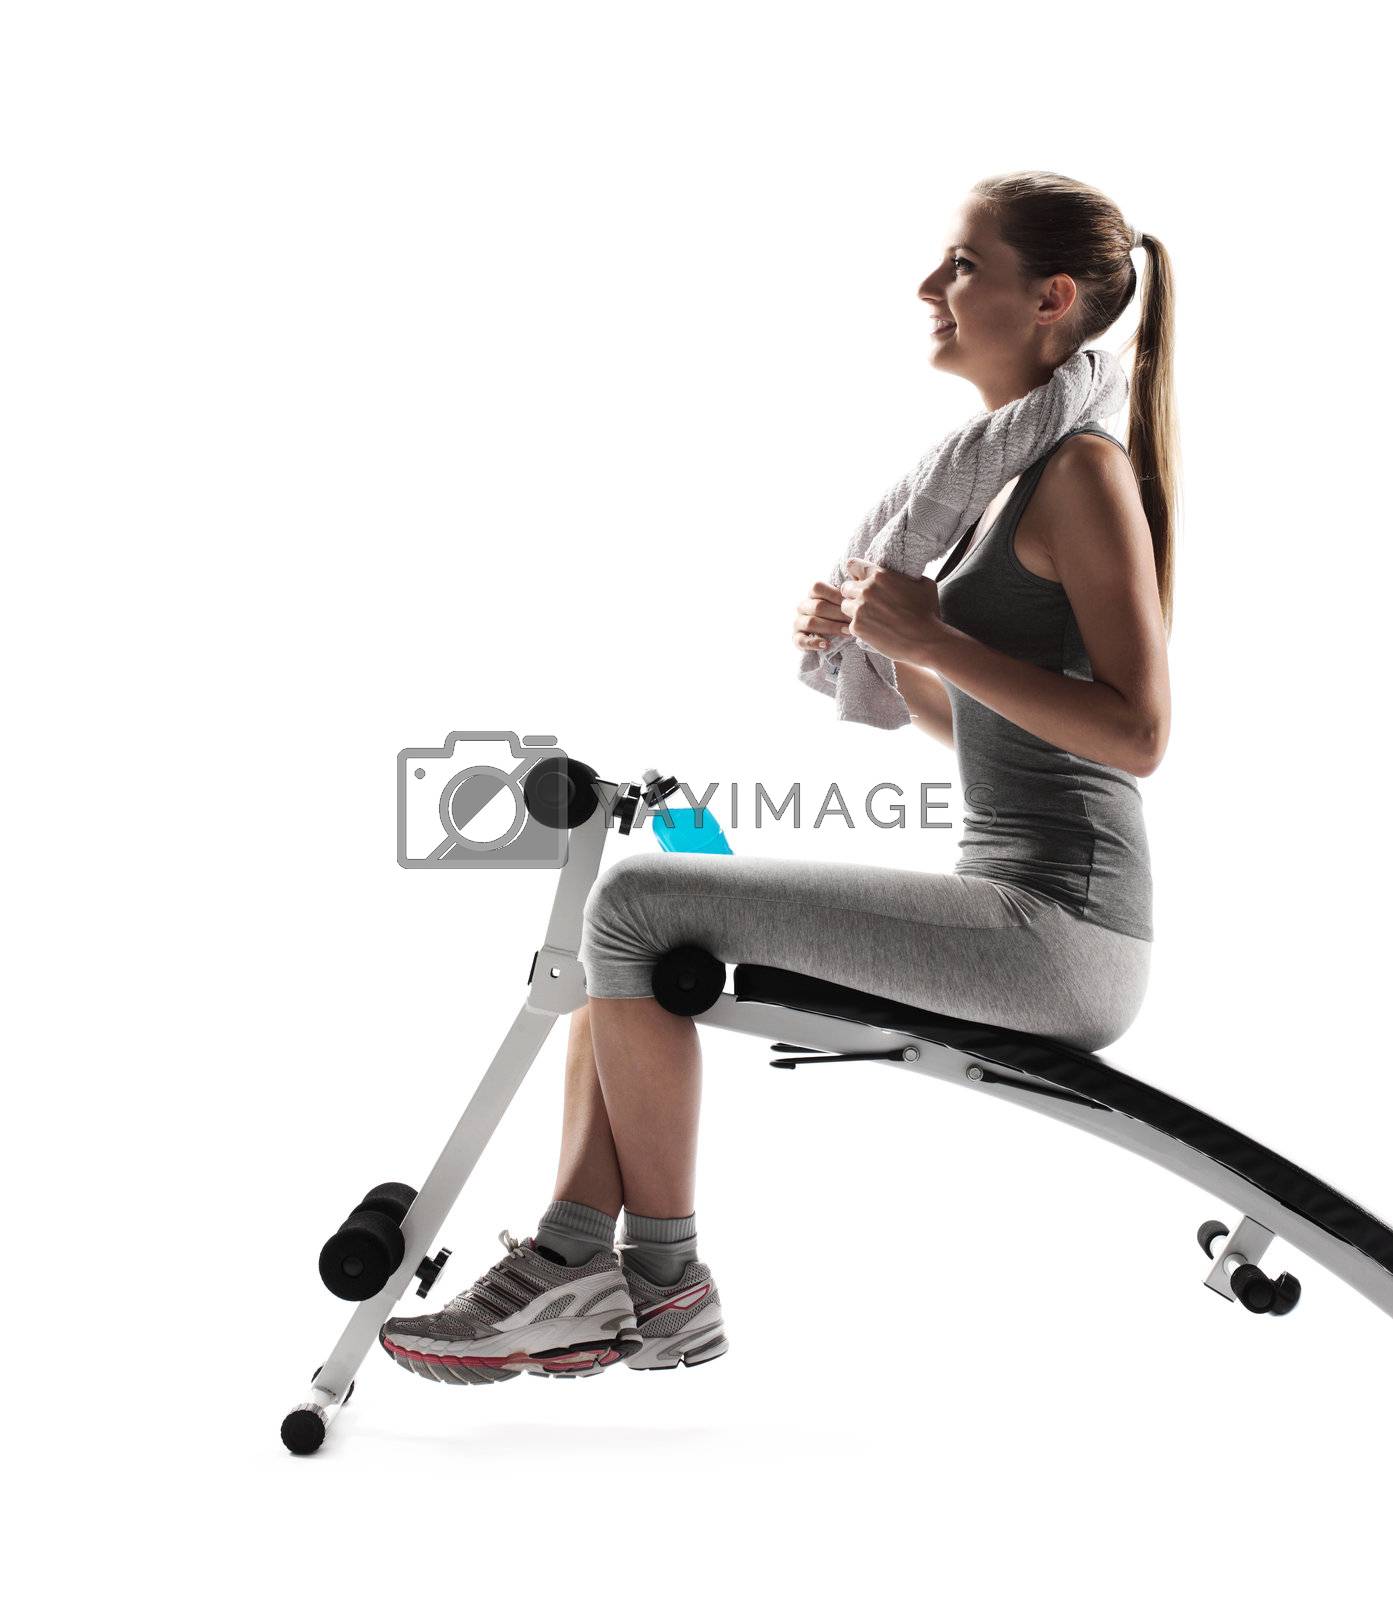 Royalty free image of fitness woman by stokkete